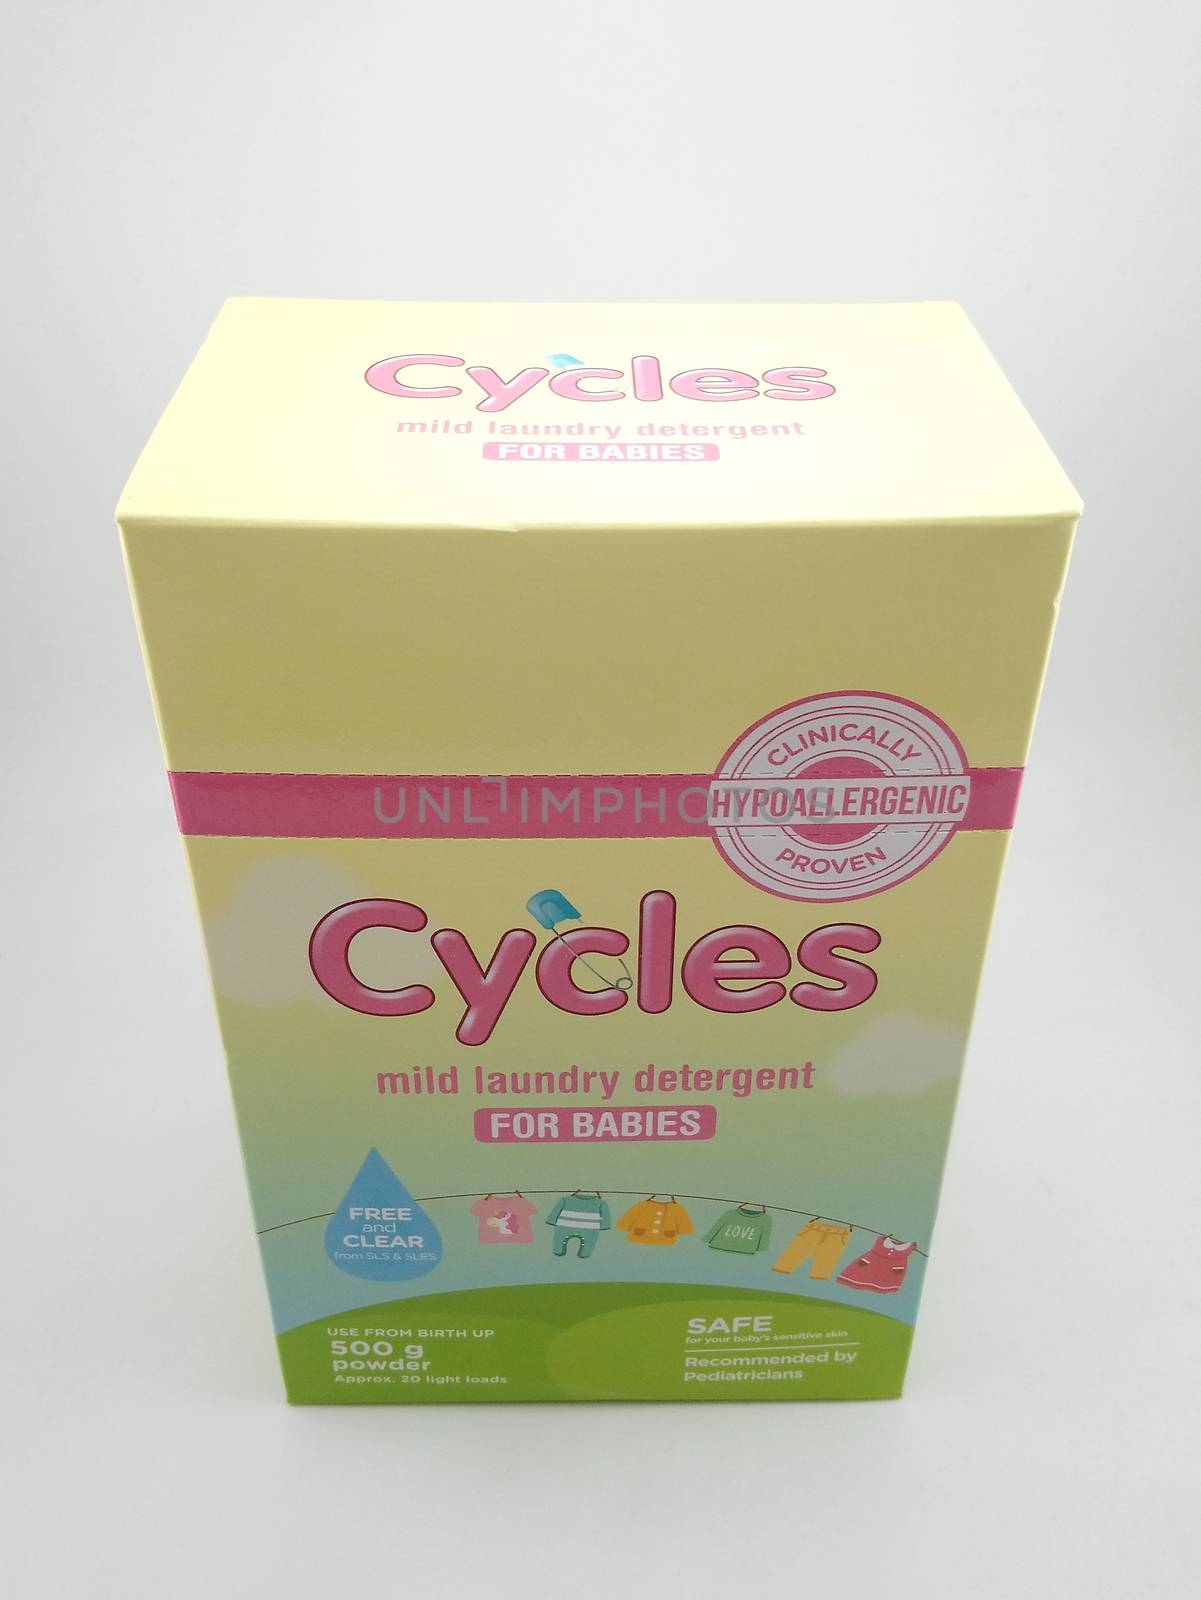 Cycles mild laundry detergent powder for babies in Manila, Phili by imwaltersy